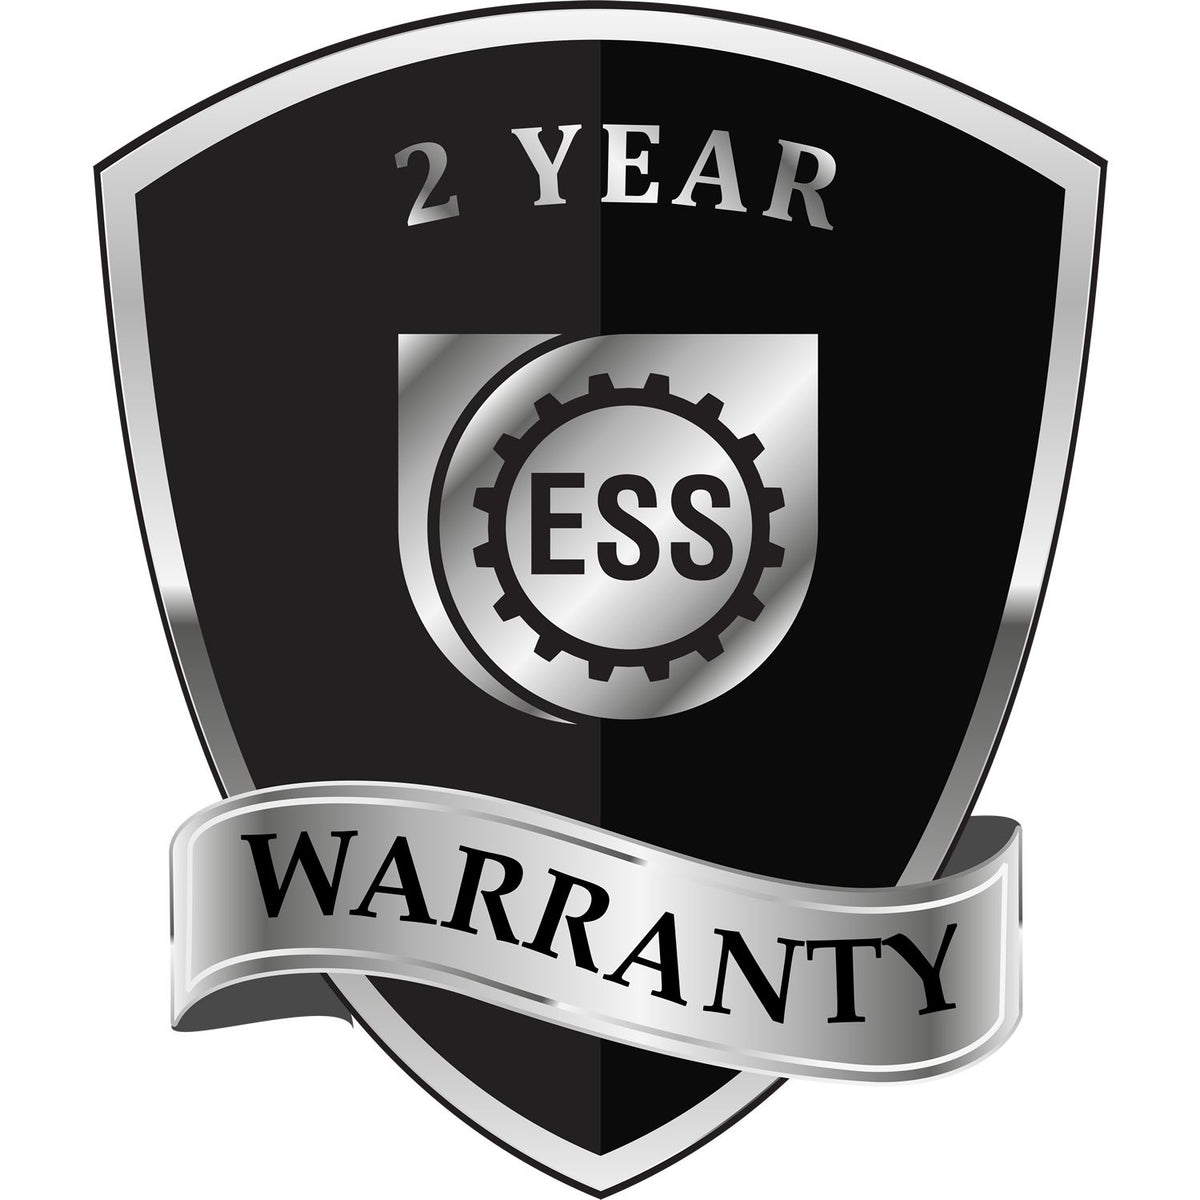 A badge or emblem showing a warranty icon for the Heavy Duty Cast Iron Minnesota Engineer Seal Embosser